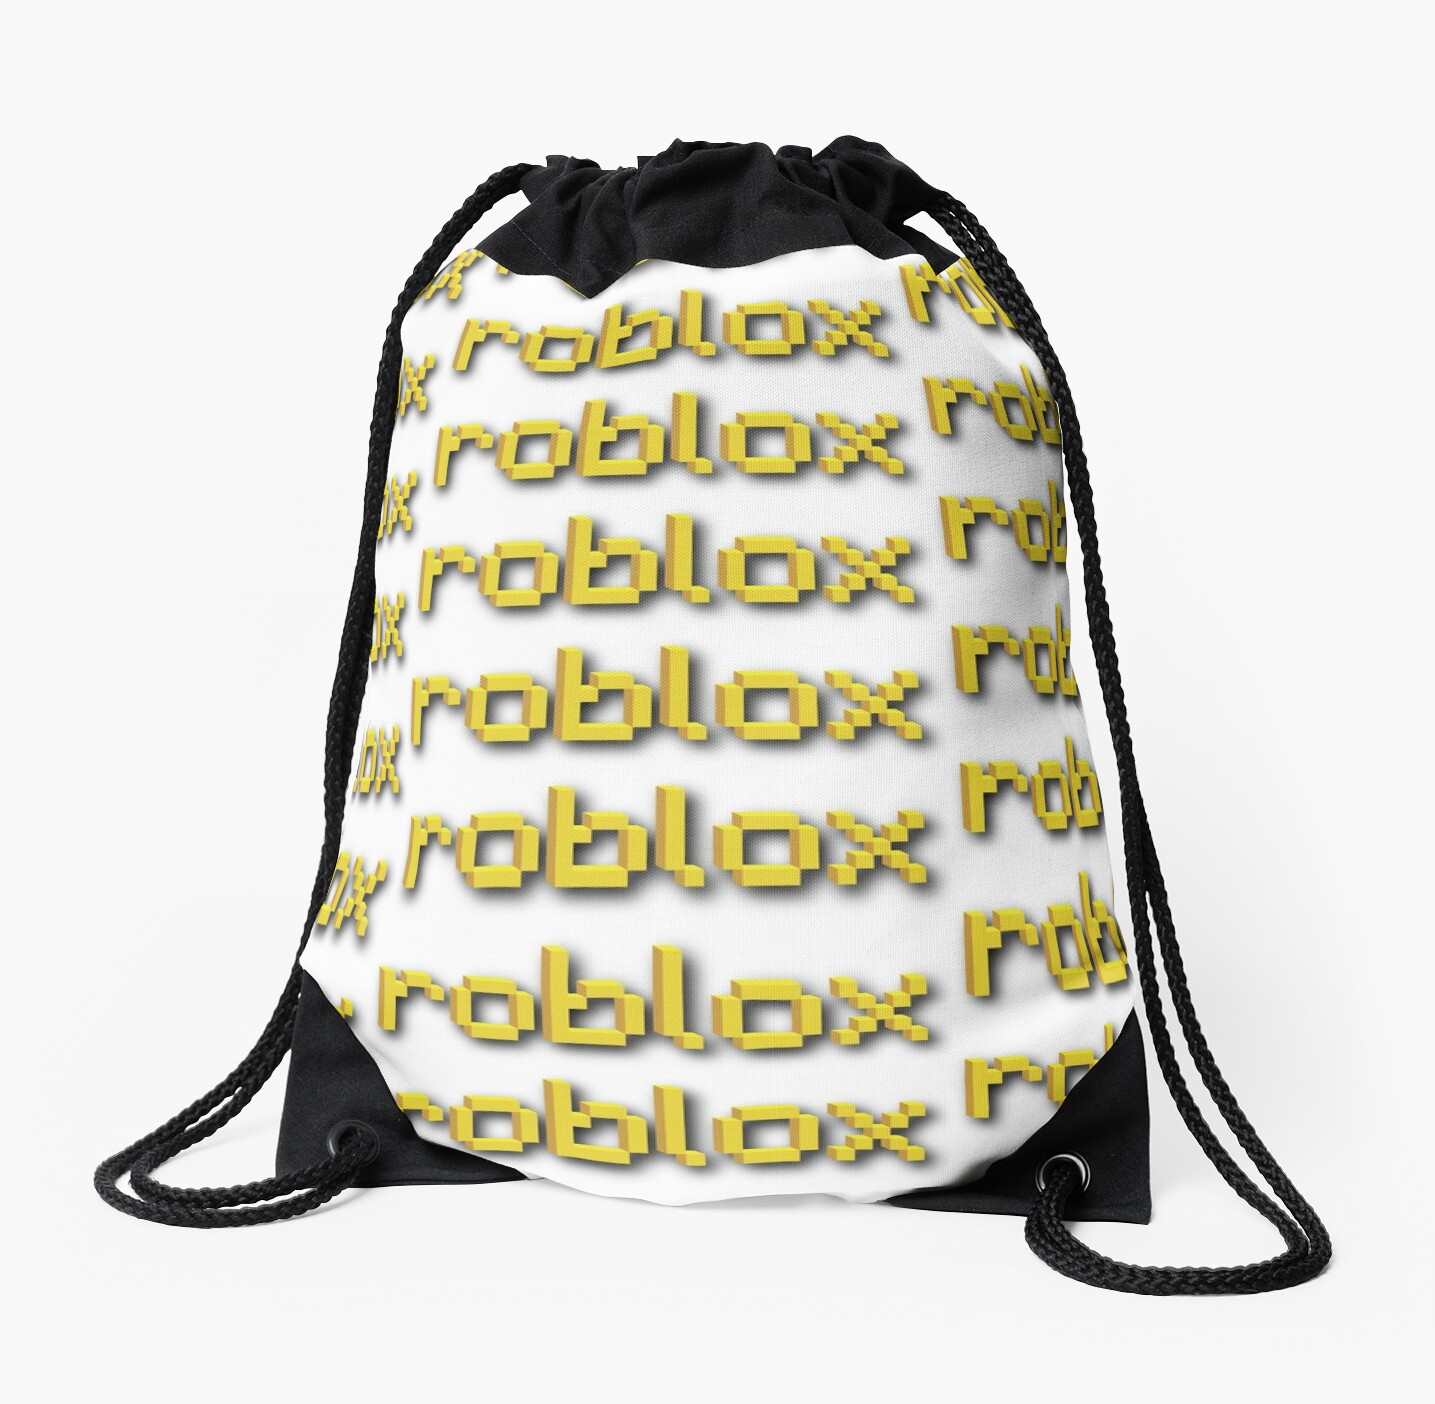 Roblox Minecraft Drawstring Bag By Mint Jams Redbubble - roblox tote bag by kimoufaster redbubble